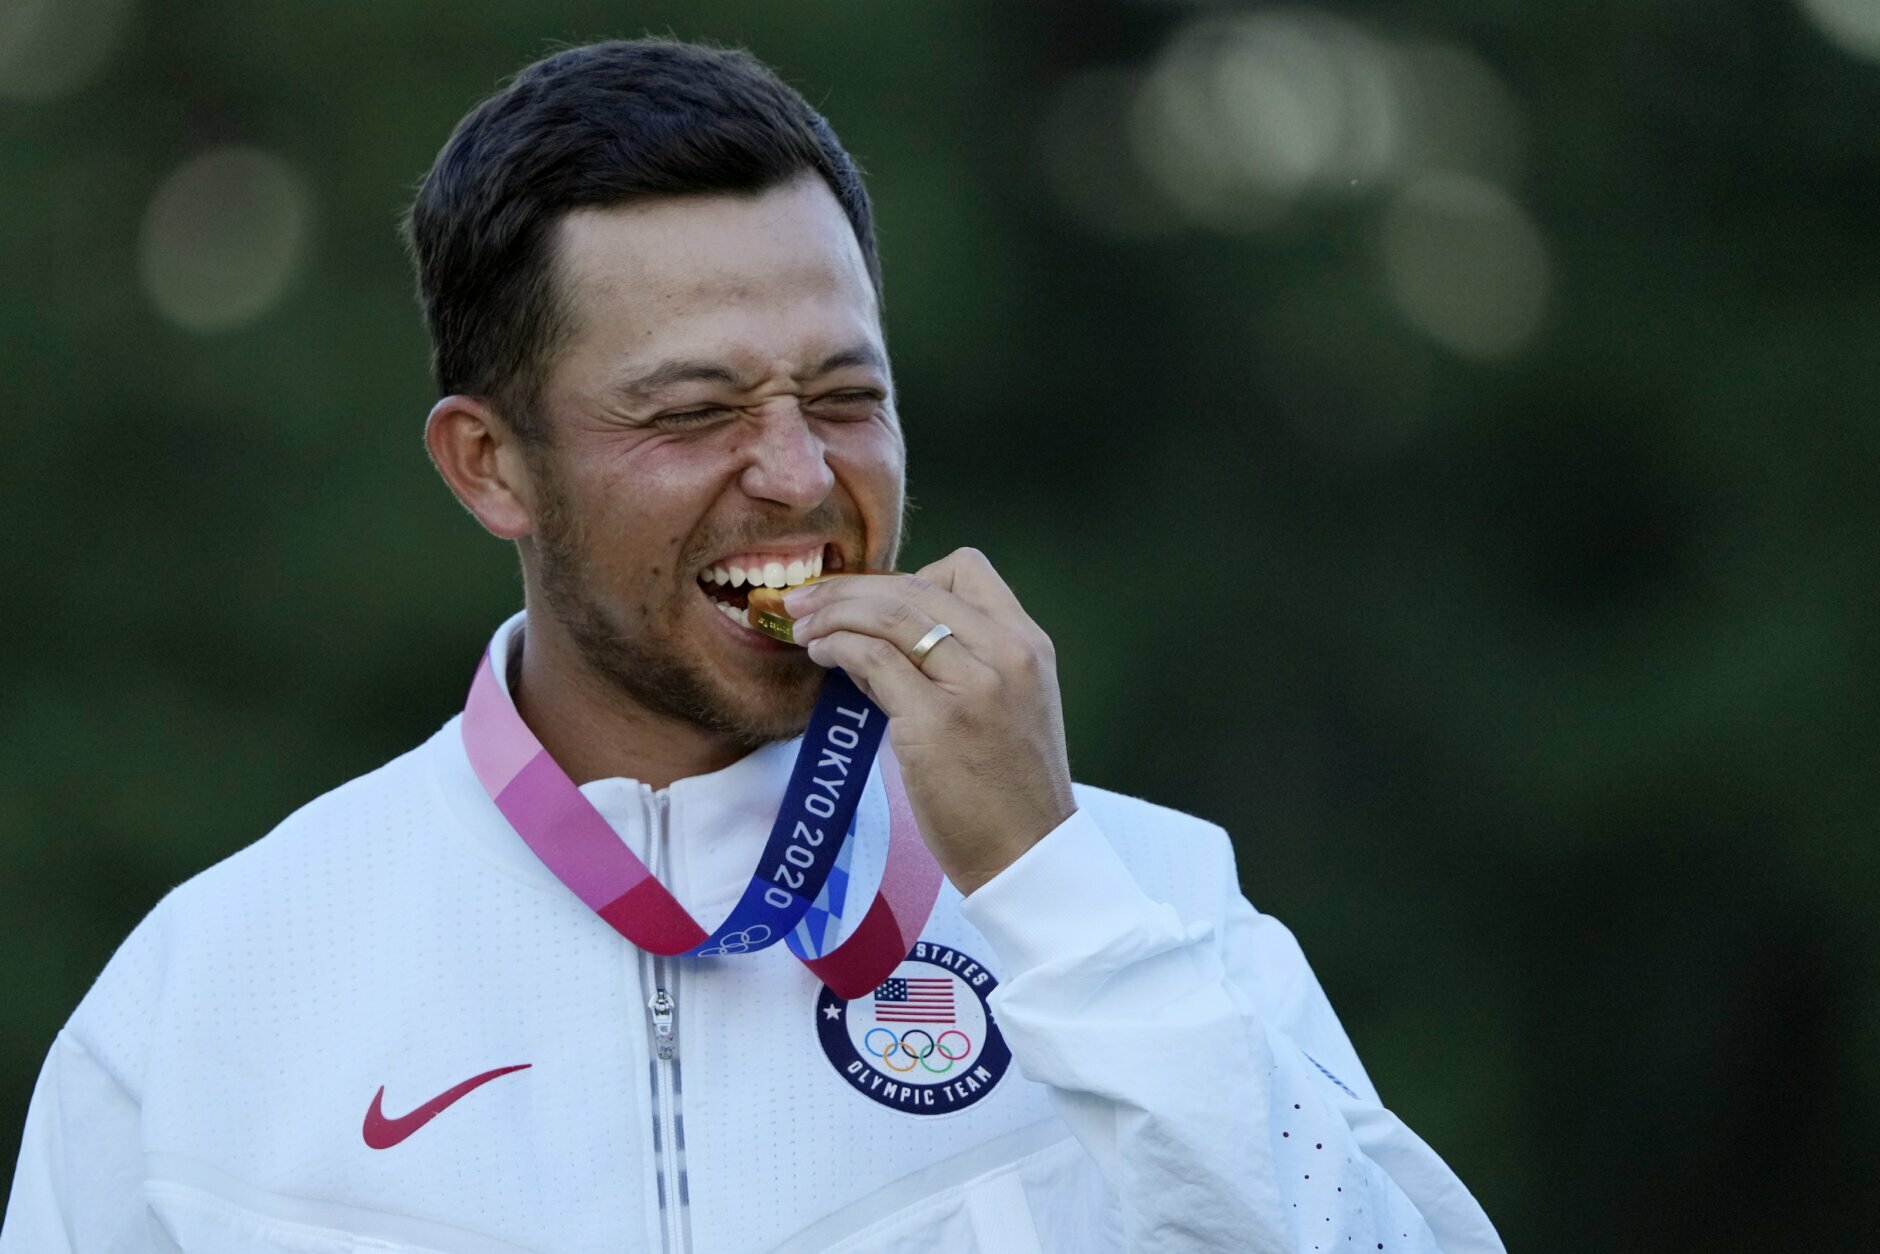 Xander Schauffele, of the United States, walks bites his gold medal in the men's golf at the 2020 Summer Olympics on Sunday, Aug. 1, 2021, in Kawagoe, Japan. (AP Photo/Andy Wong)